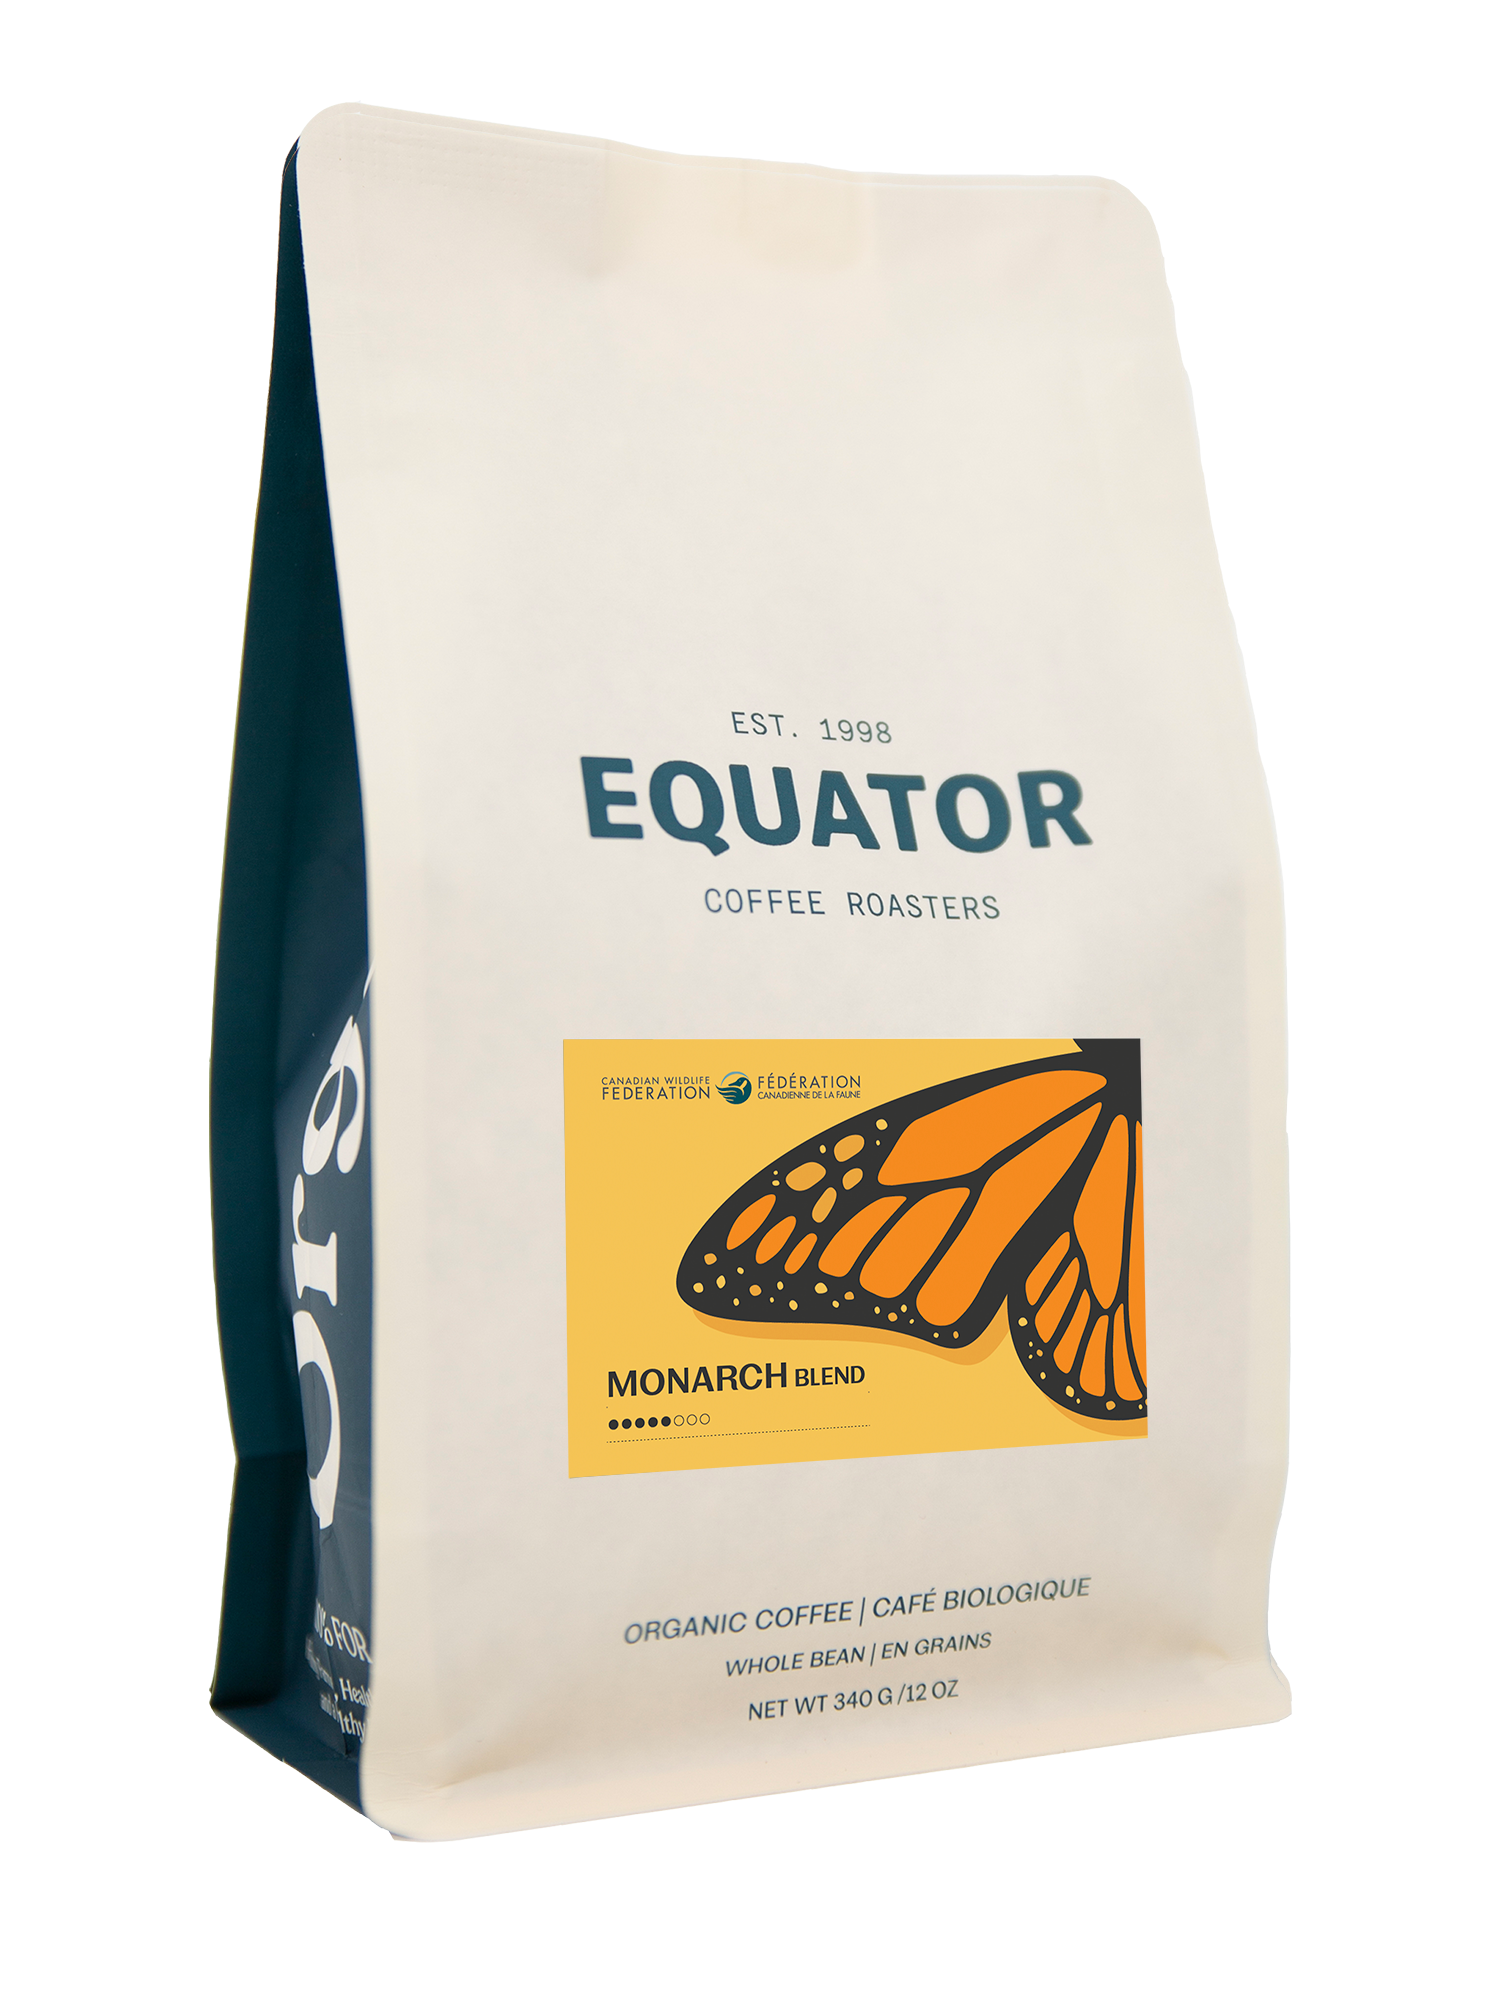 340g bag of the Monarch Blend Coffee for the Canadian Wildlife Federation.